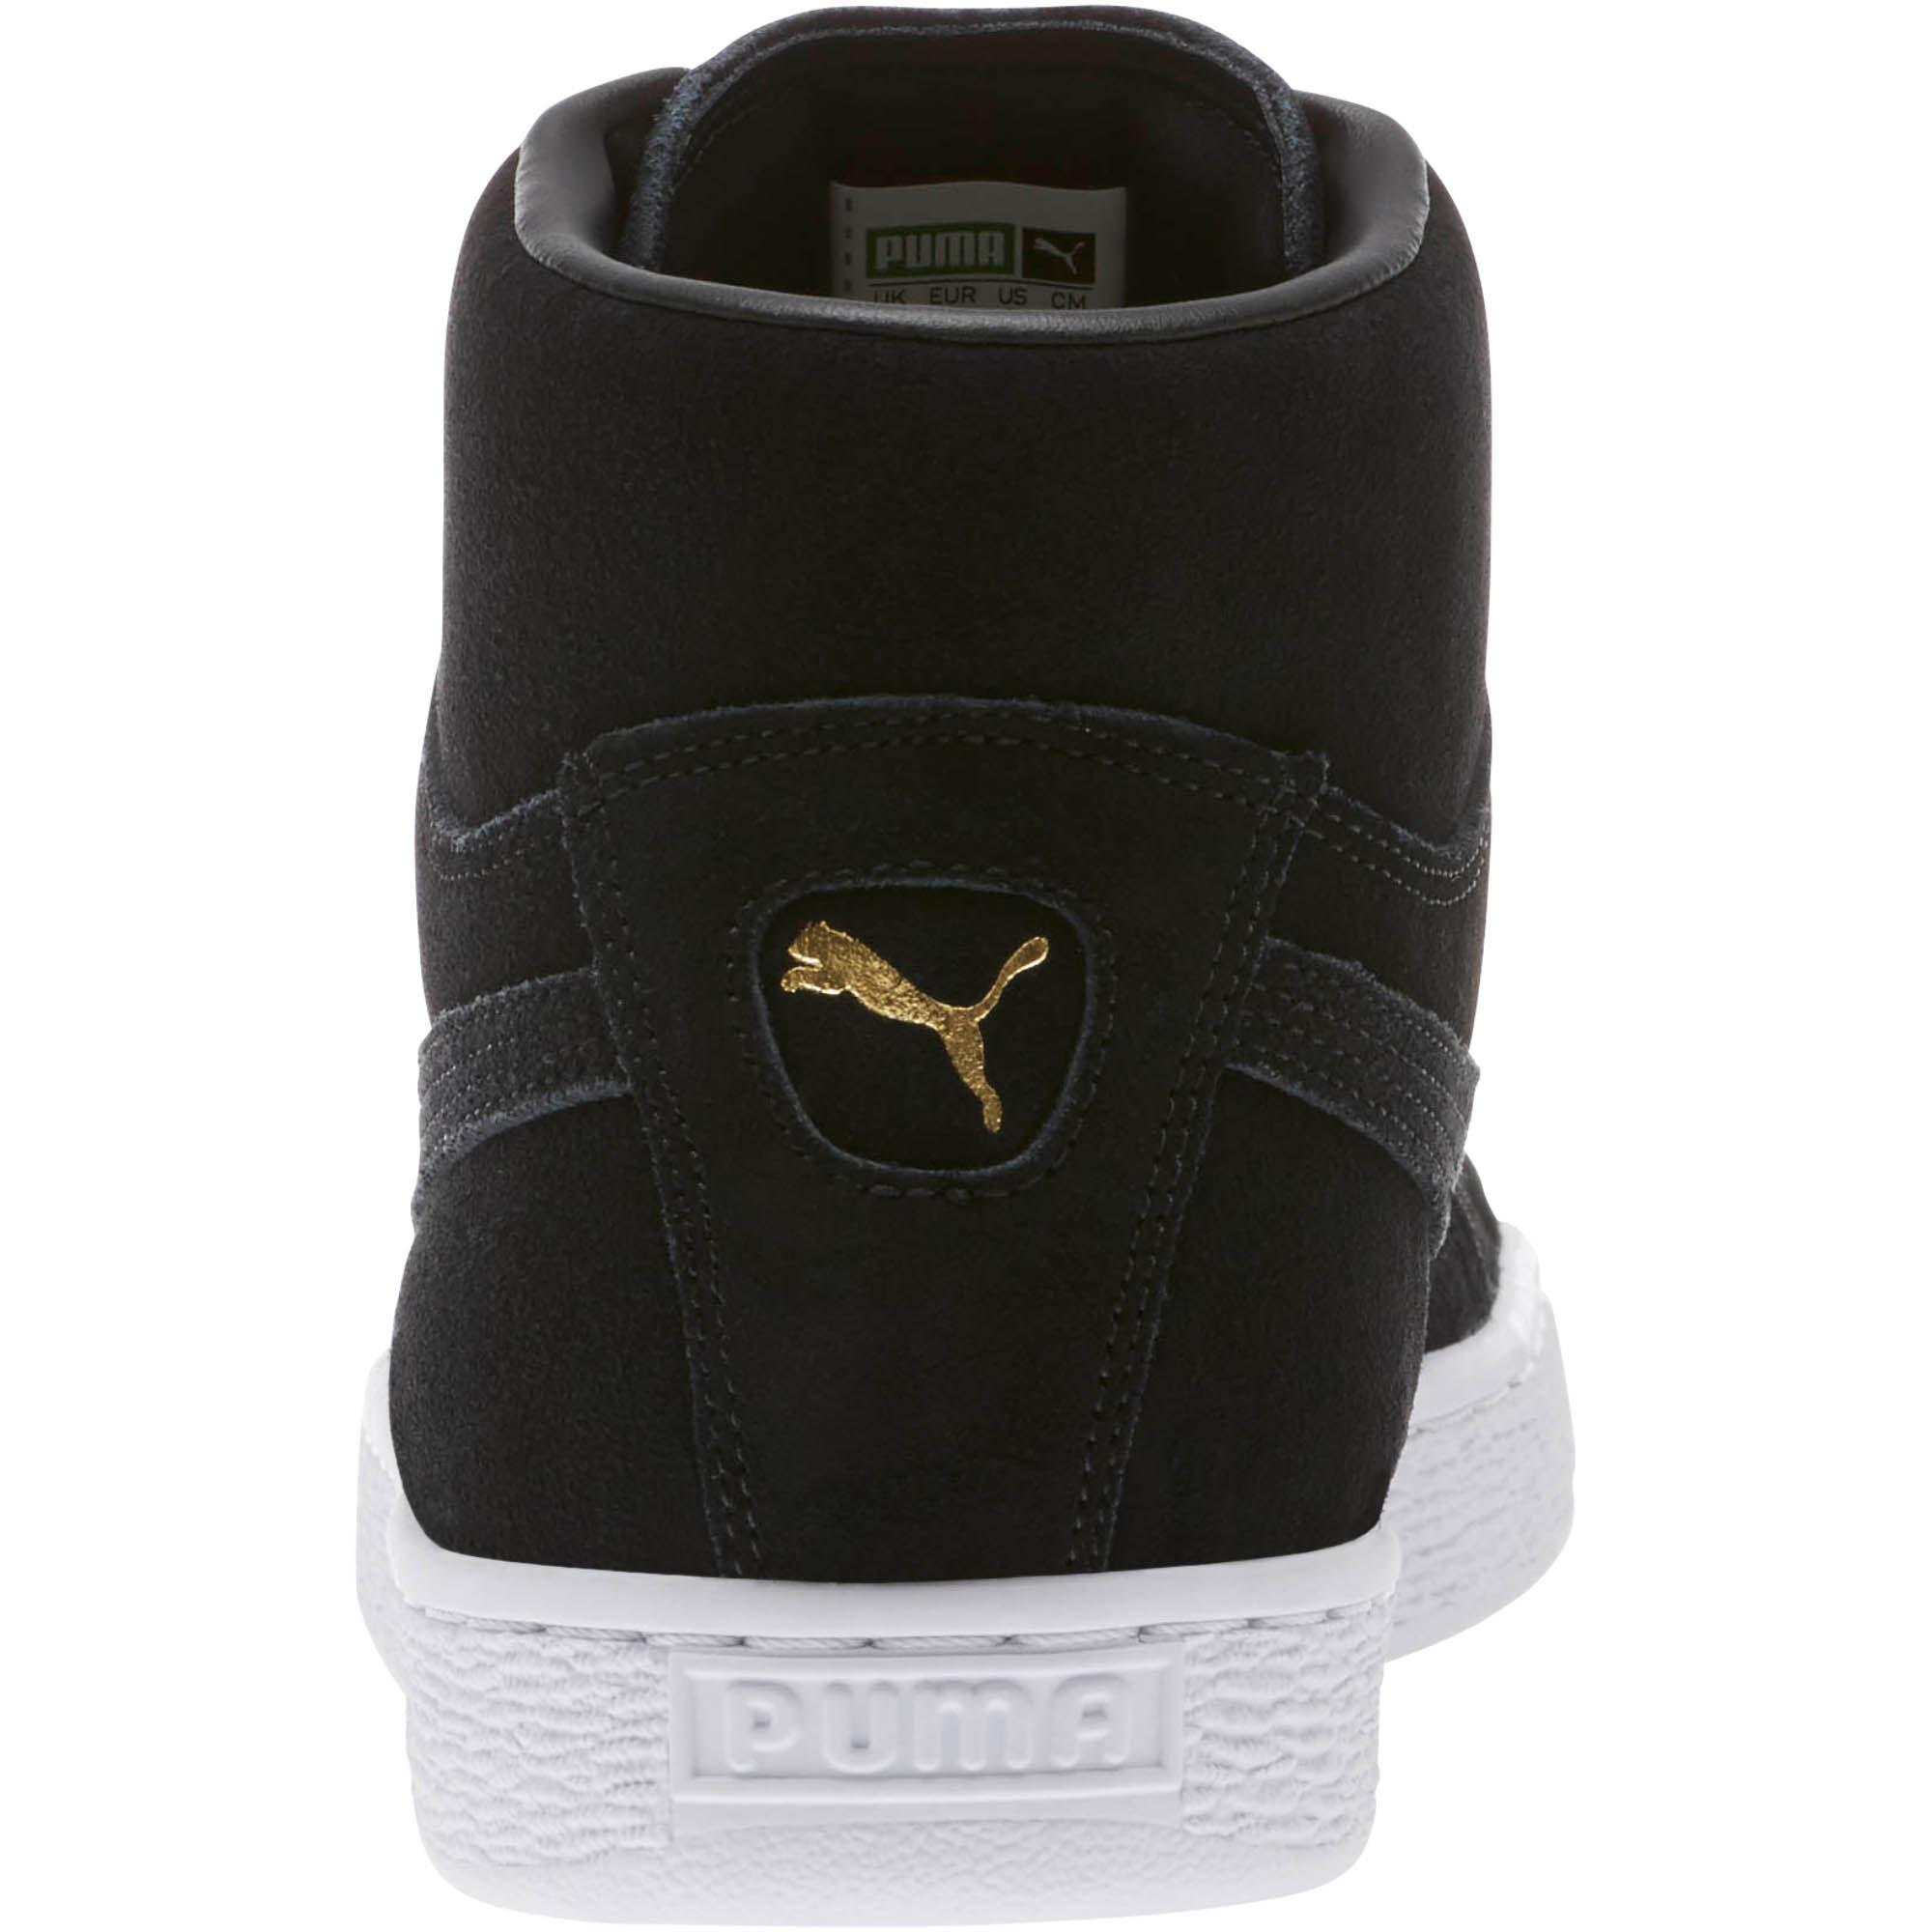 PUMA Suede Classic Mid Sneakers in Black for Men - Lyst